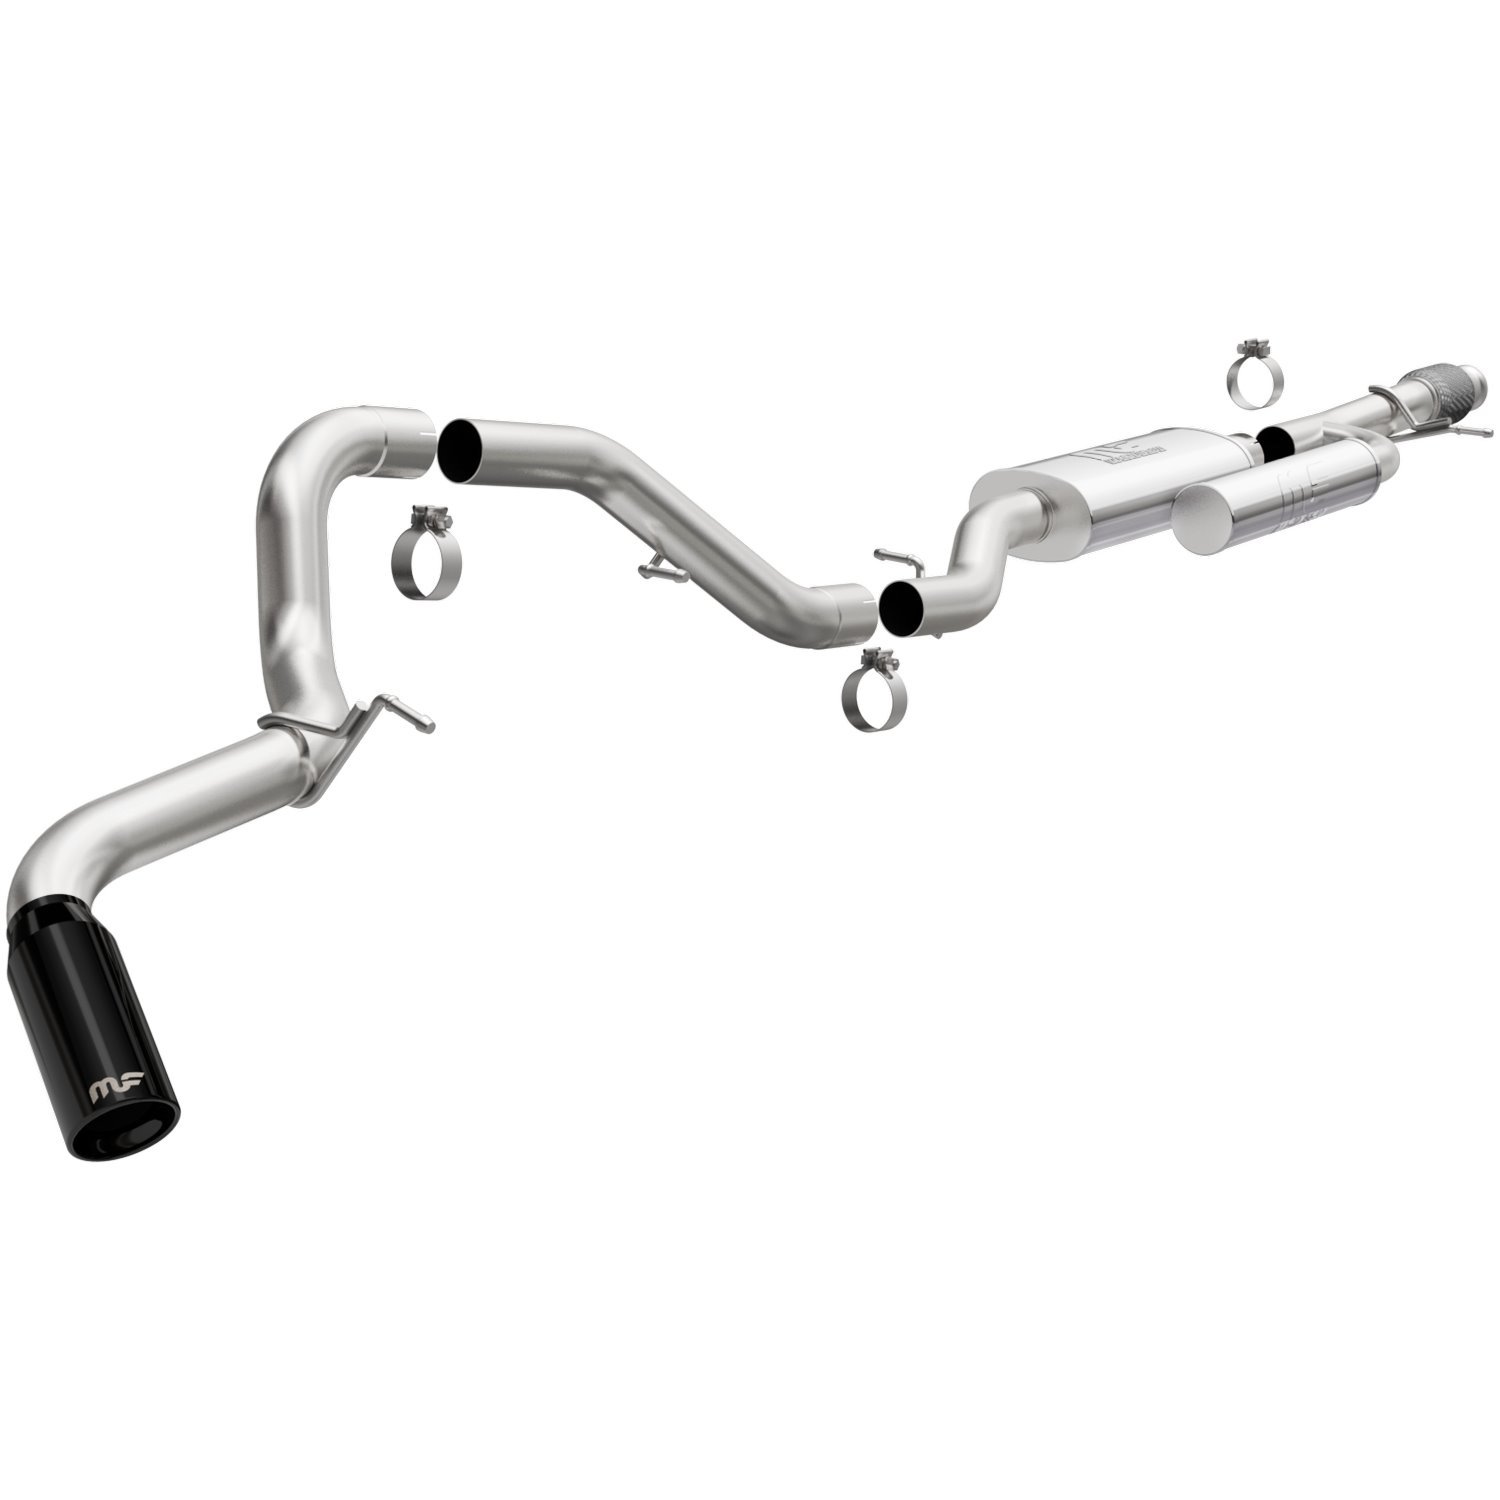 Street Series Cat-Back Exhaust System Fits Select Late-Model Chevy Tahoe, GMC Yukon 5.3L V8